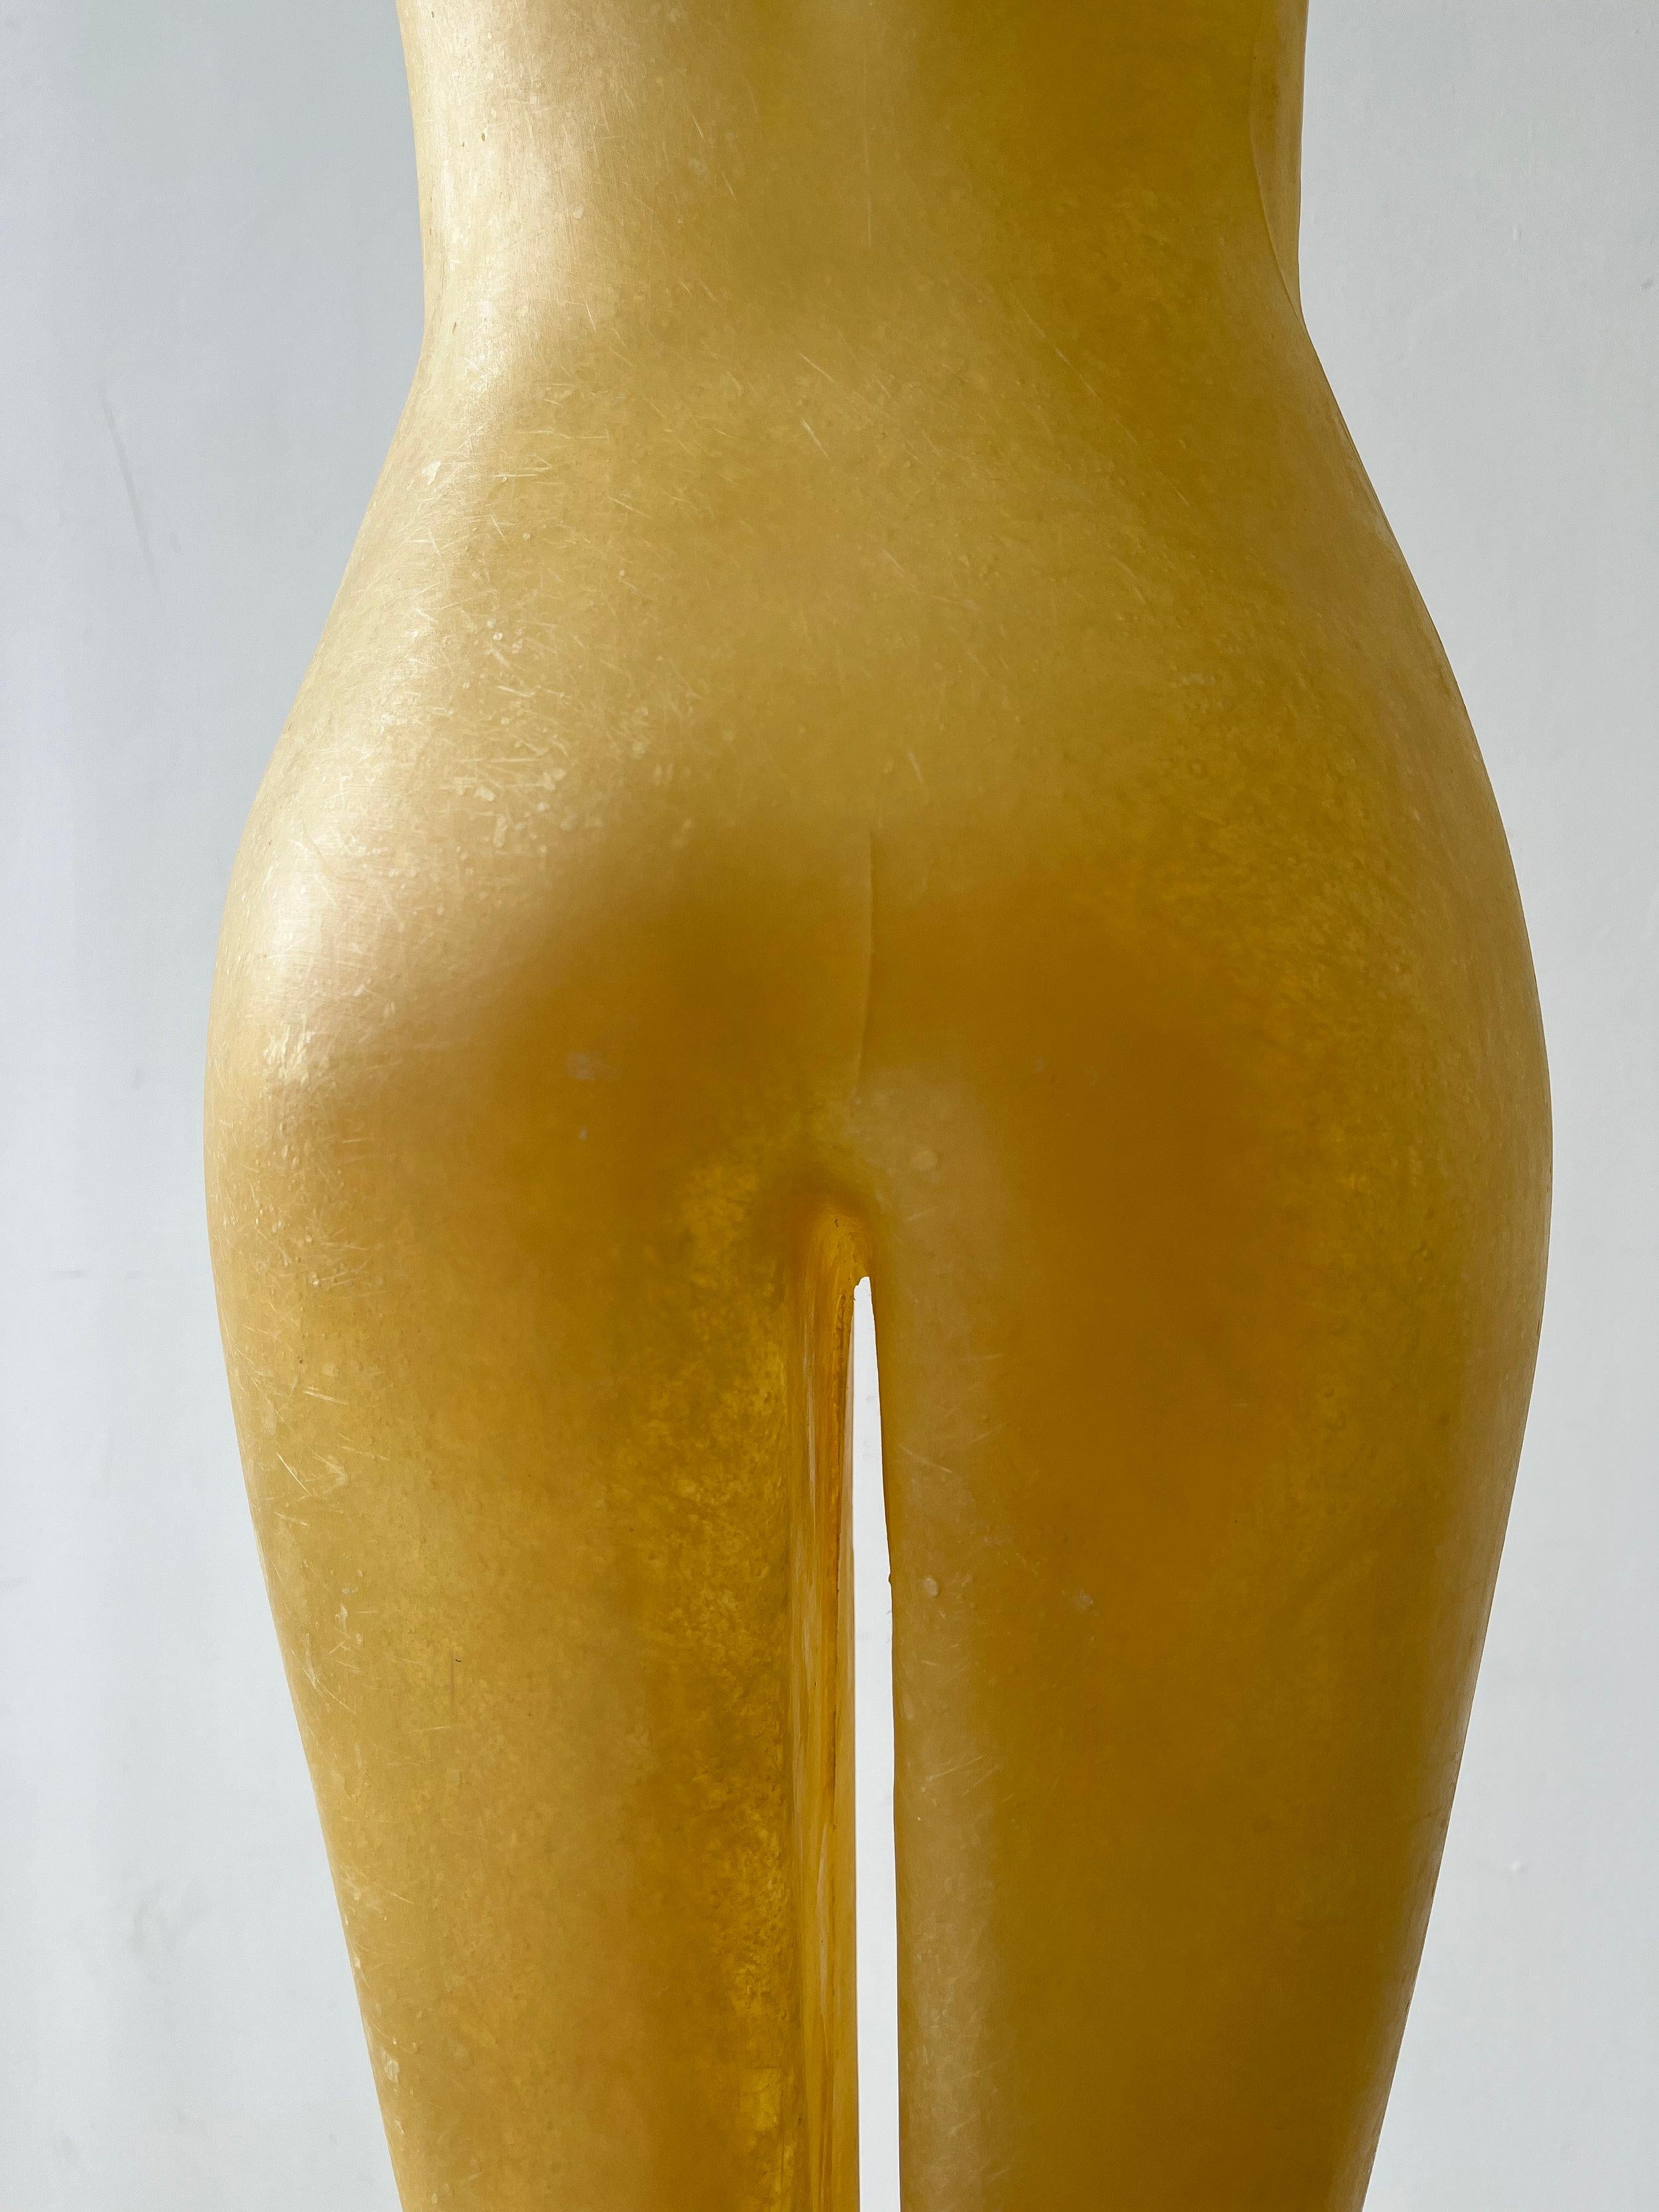 Vintage Exaggerated Molded Fiberglass Female Body Form on Fluted Base For Sale 10